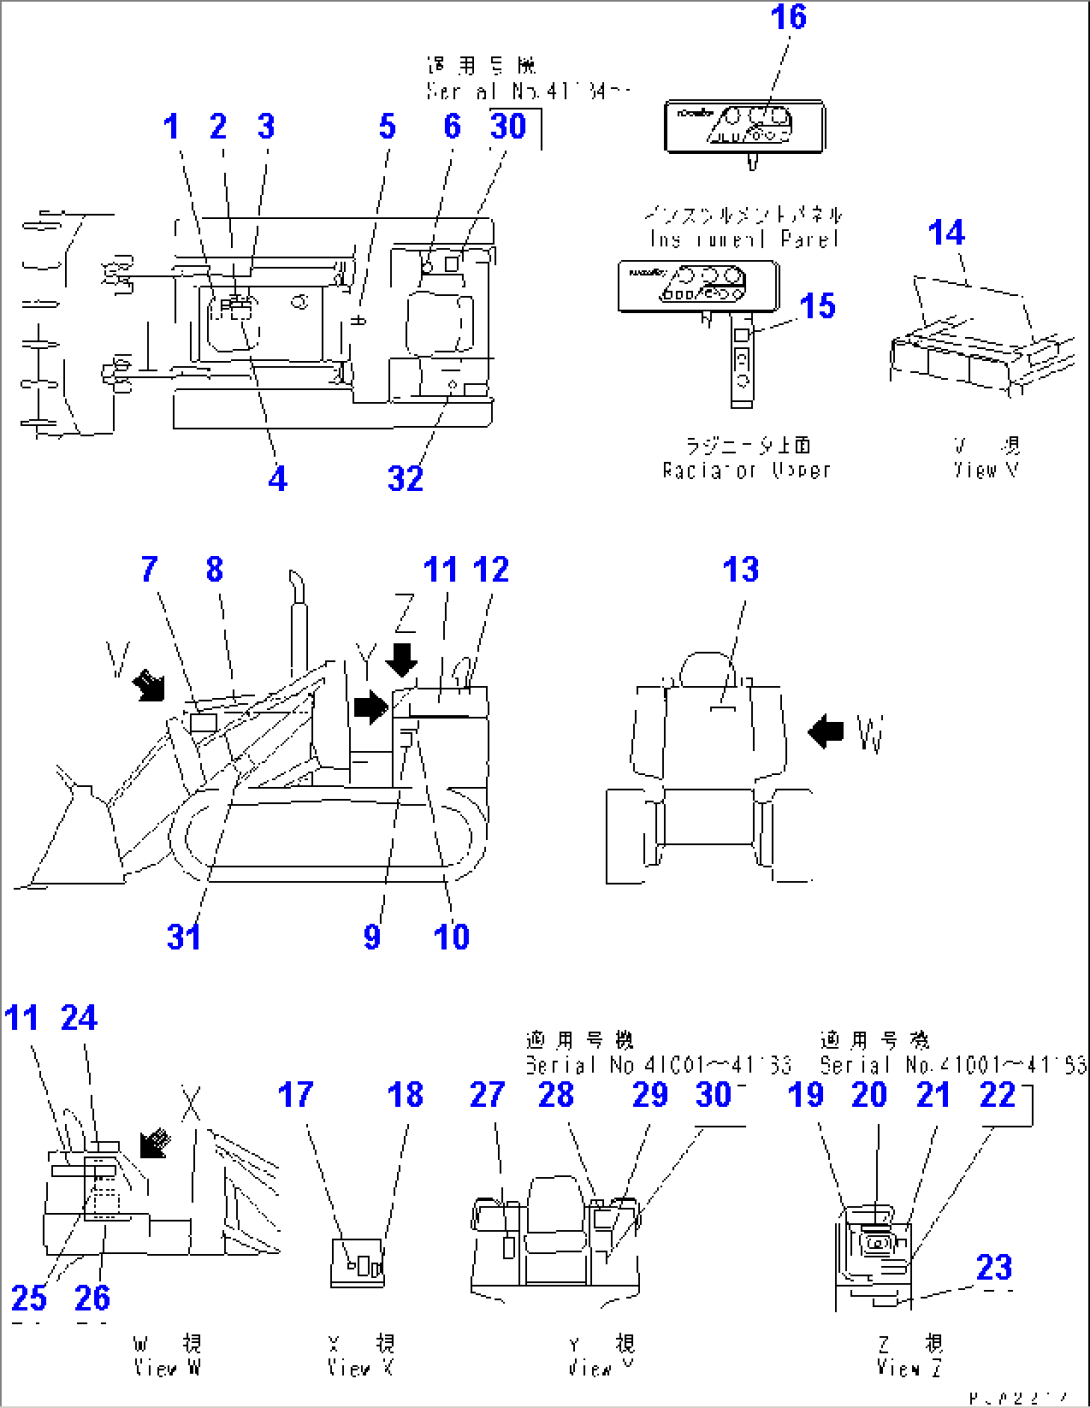 MARKS AND PLATES (GERMAN) (TBG SPEC.)